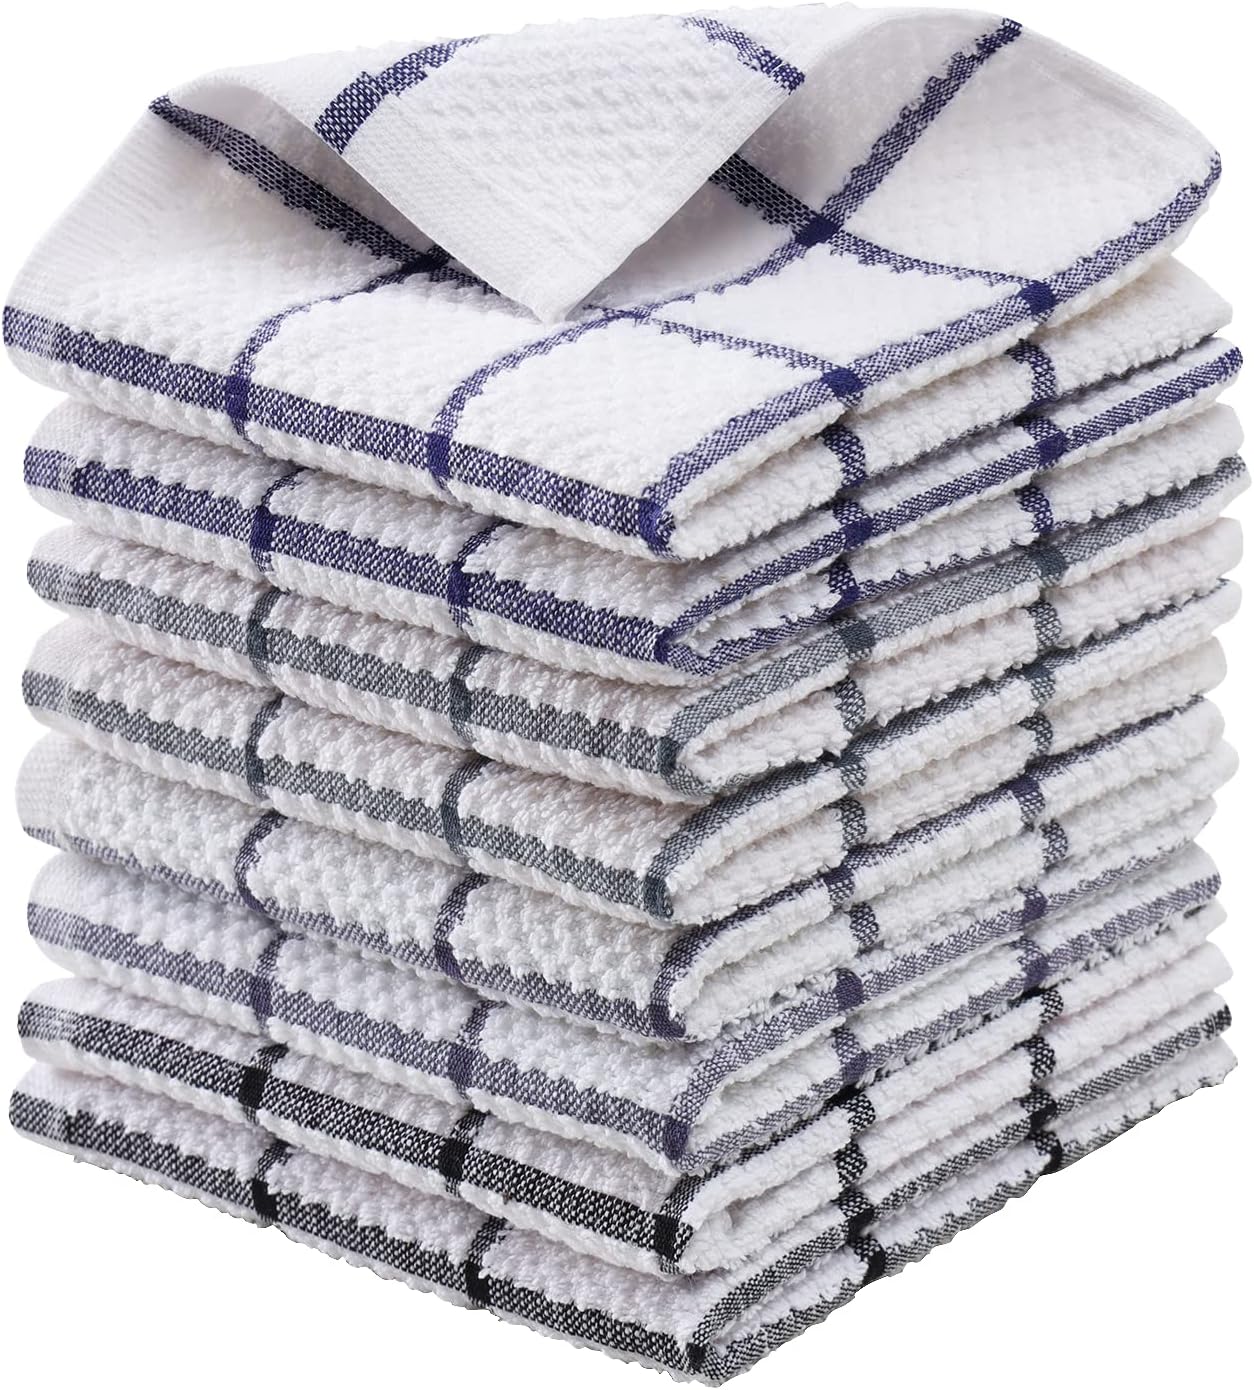 PPAXL Cotton Dish Towels for Kitchen, Terry Dish Cloths for Washing Dishes,  12 x 12 Inches, Light and Soft, Quick Drying Dish Rags for Cleaning